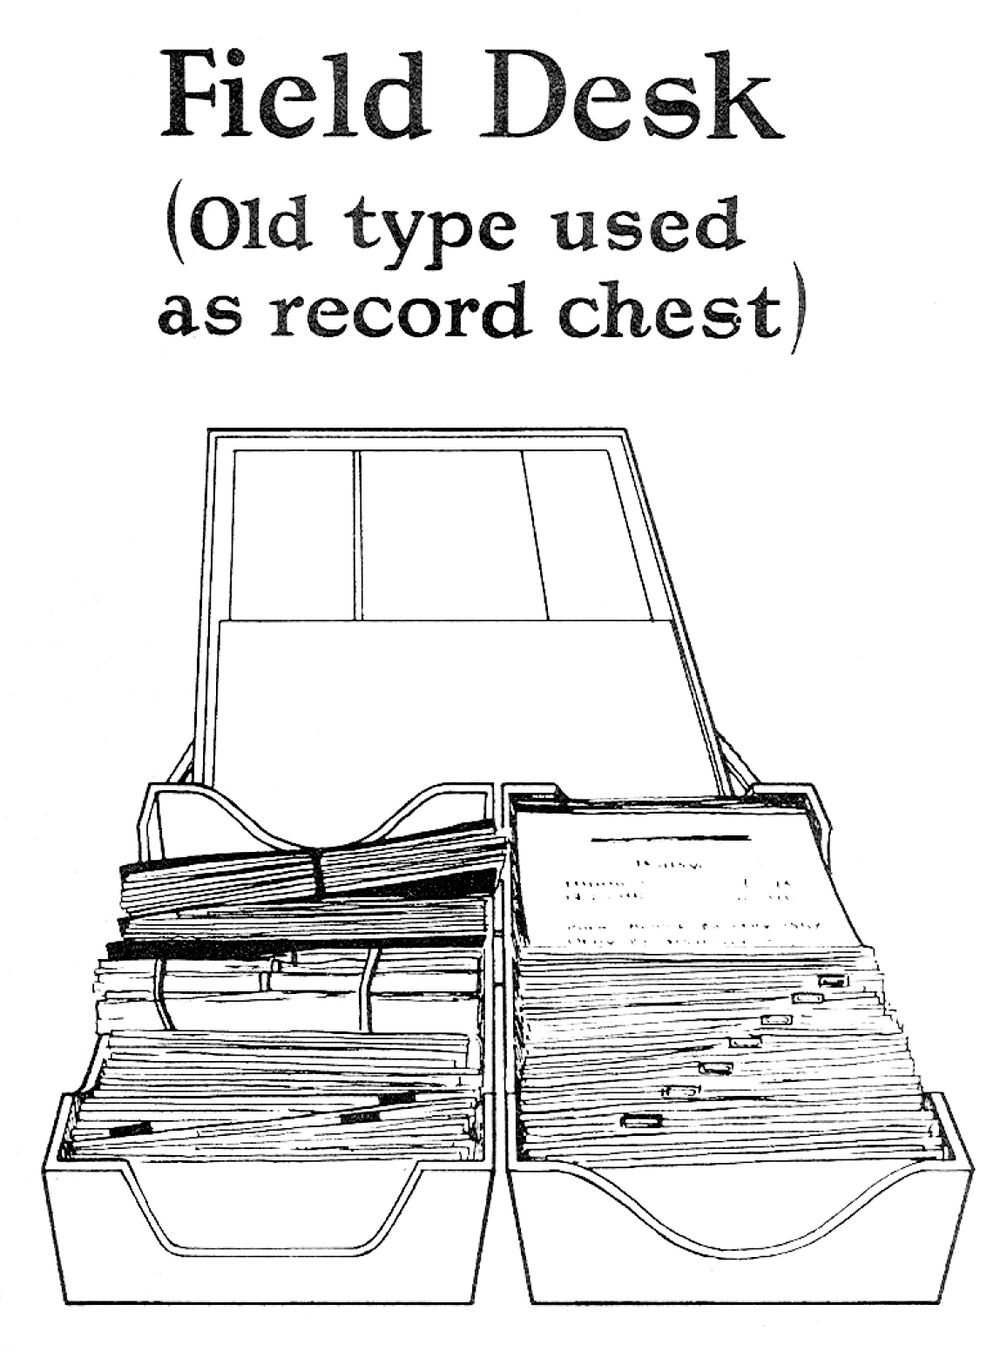 Figure No. 7
Showing the Field Desk (Old Type) in use as a Record Chest.